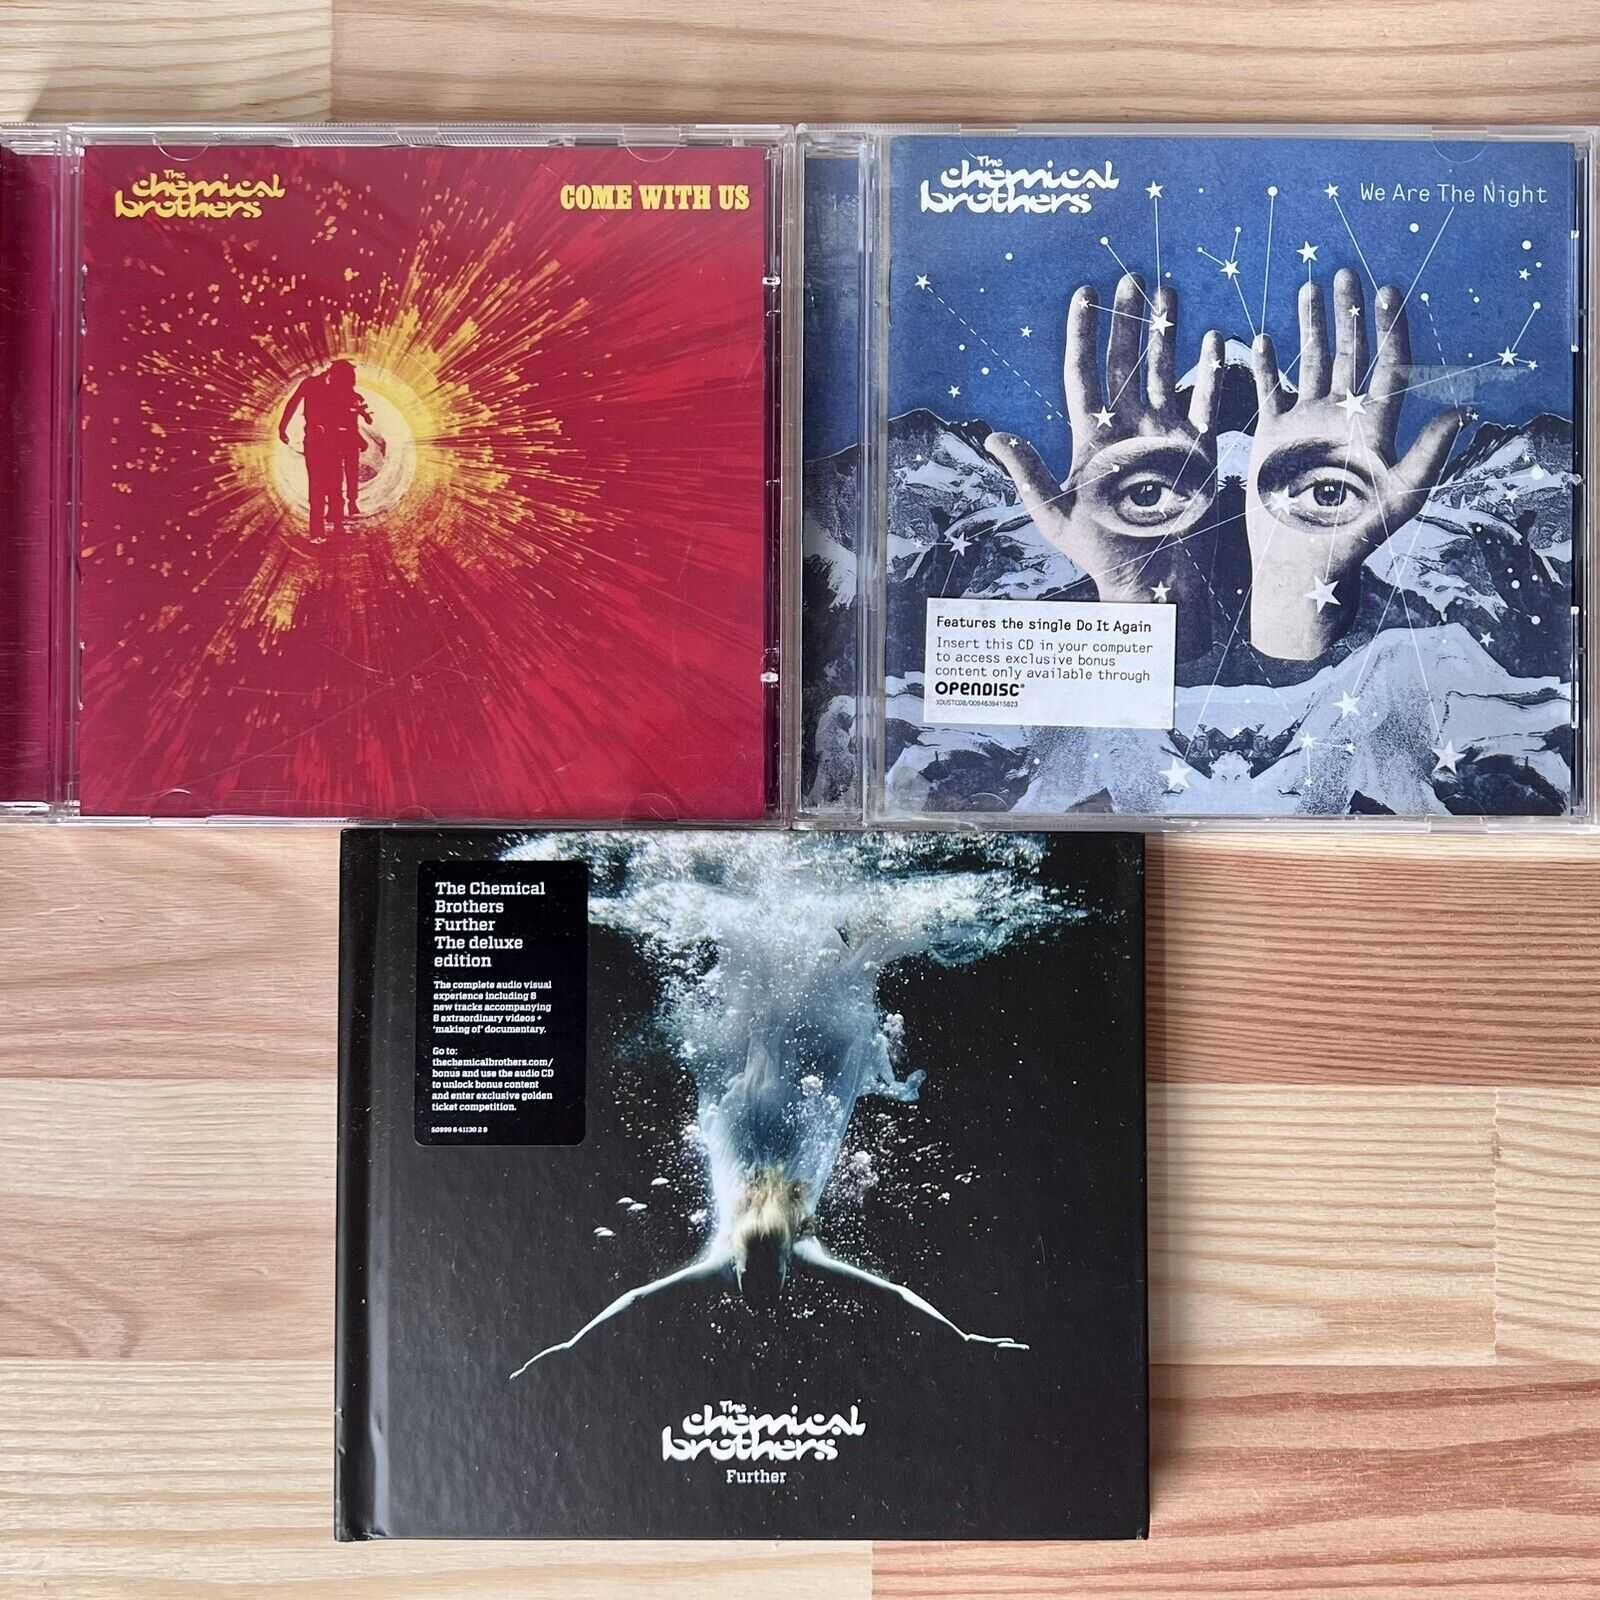 The Chemical Brothers - 7 CD Studio Albums, 2 Singles, 1 DJ Mix + DVD